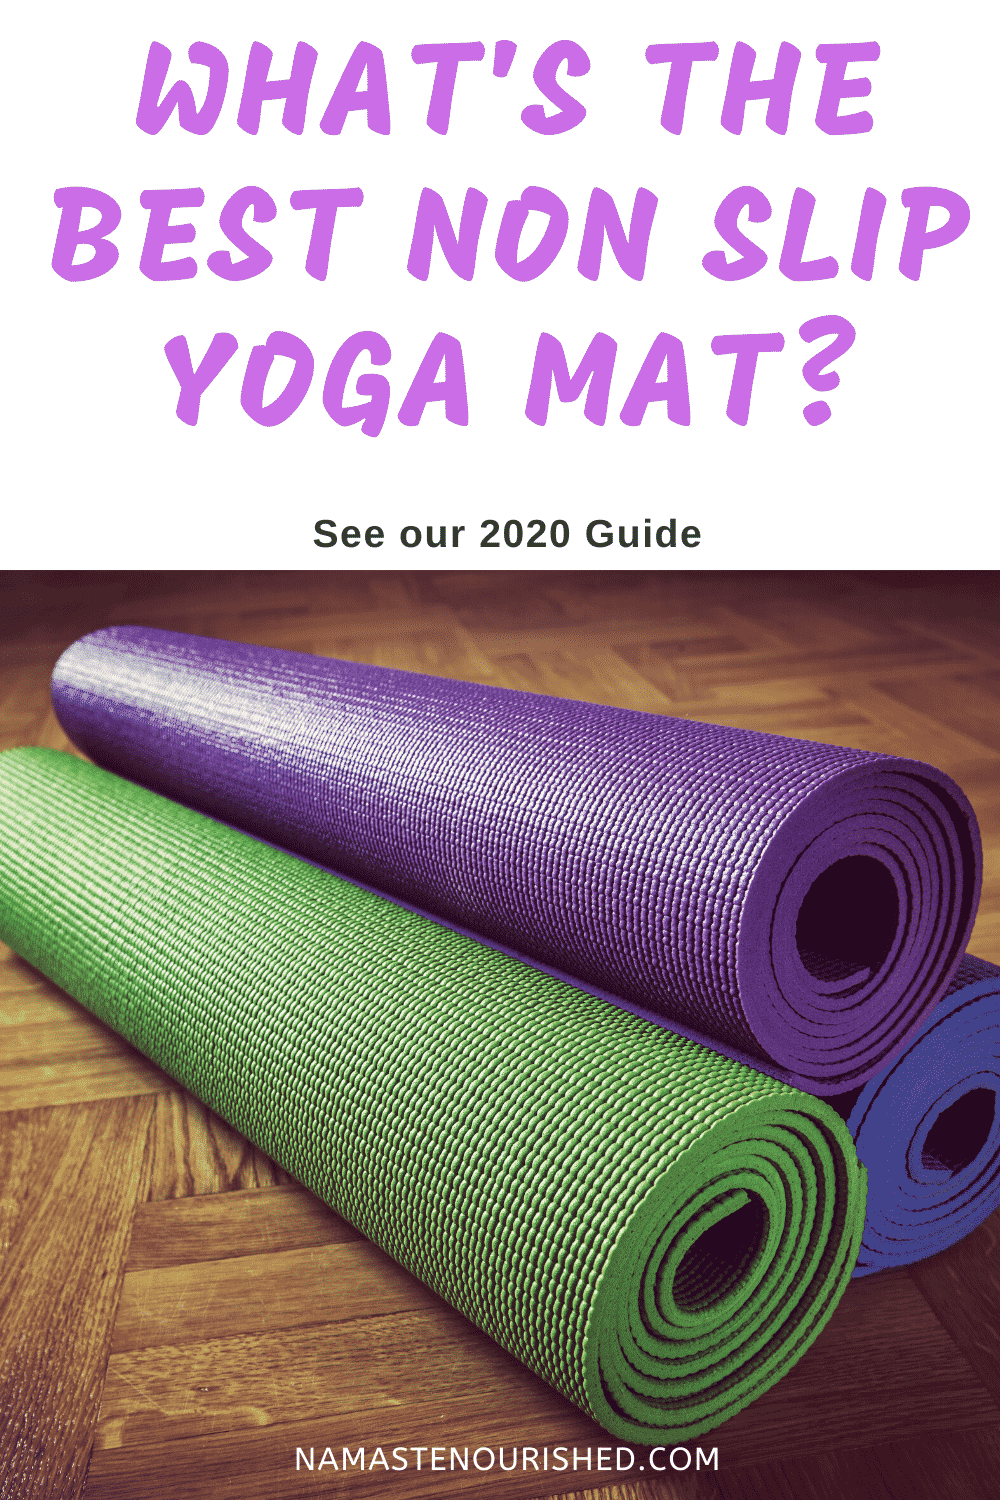 What's the Best Non-Slip Yoga Mat? (See our 2020 Guide!) - Namaste